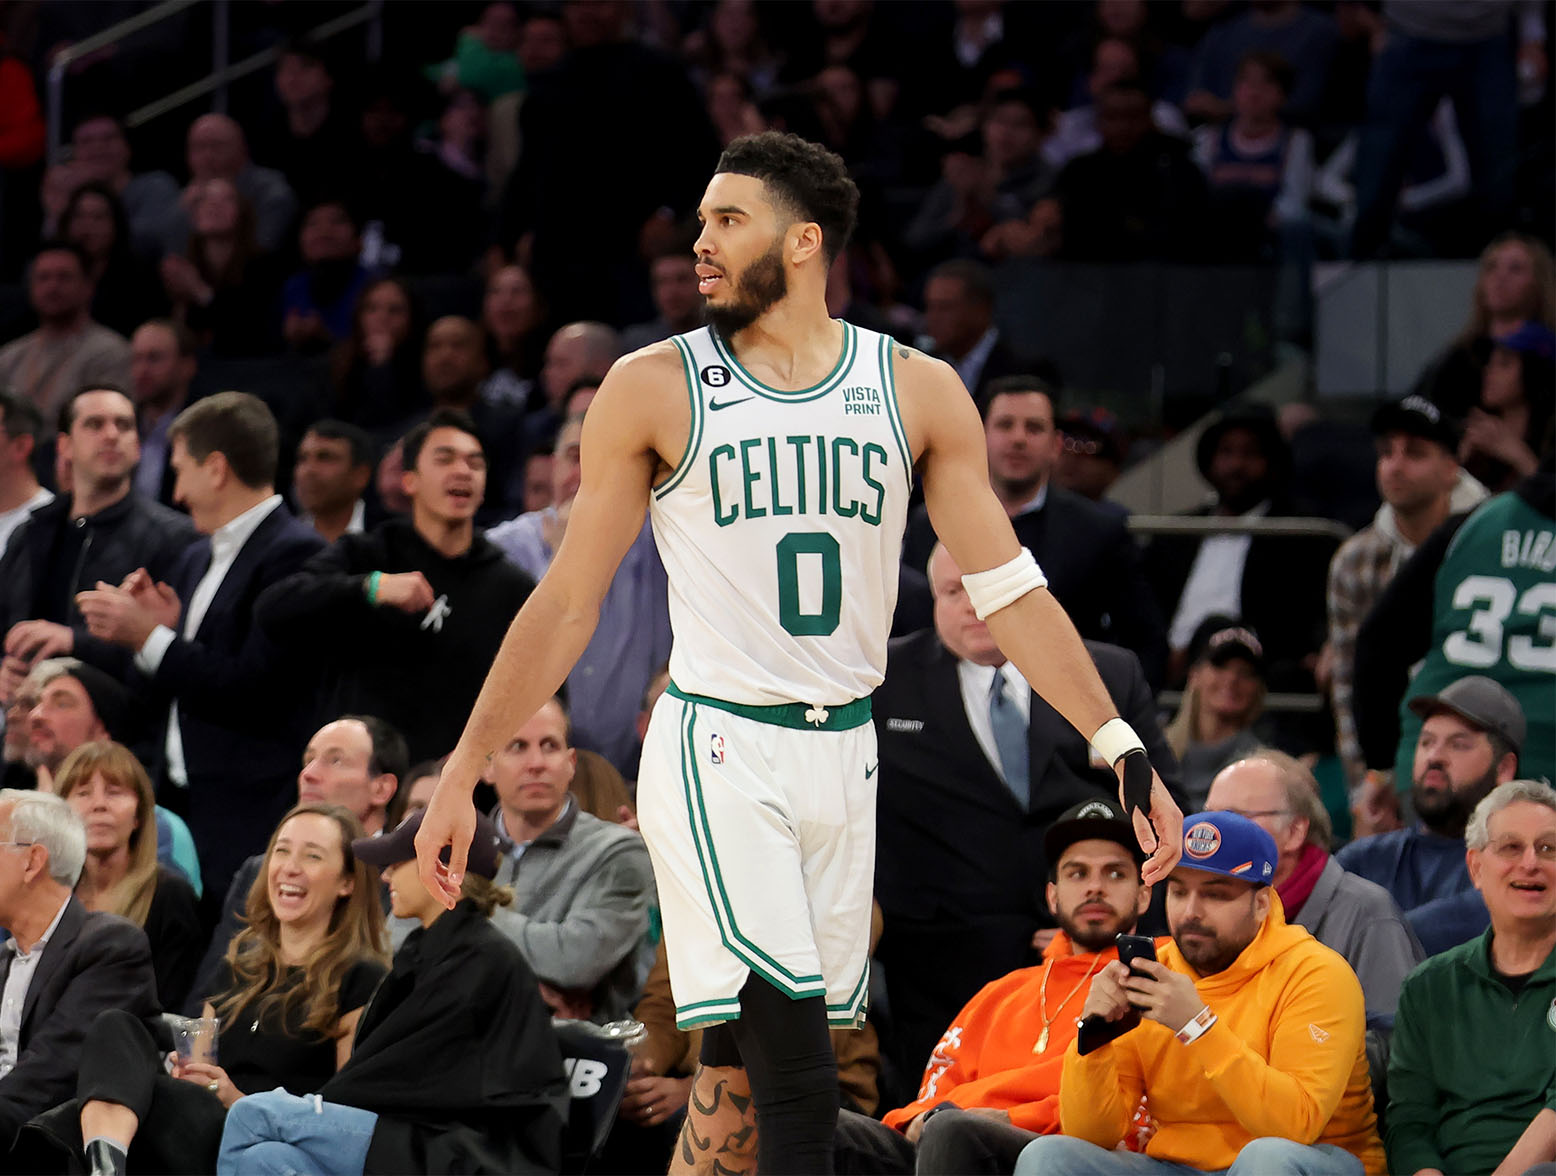 Feb 27, 2023; New York, New York, USA; Boston Celtics forward Jayson Tatum (0) reacts as he leaves the court after being ejected for a second technical foul during the fourth quarter against the New York Knicks at Madison Square Garden. Mandatory Credit: Brad Penner-USA TODAY Sports